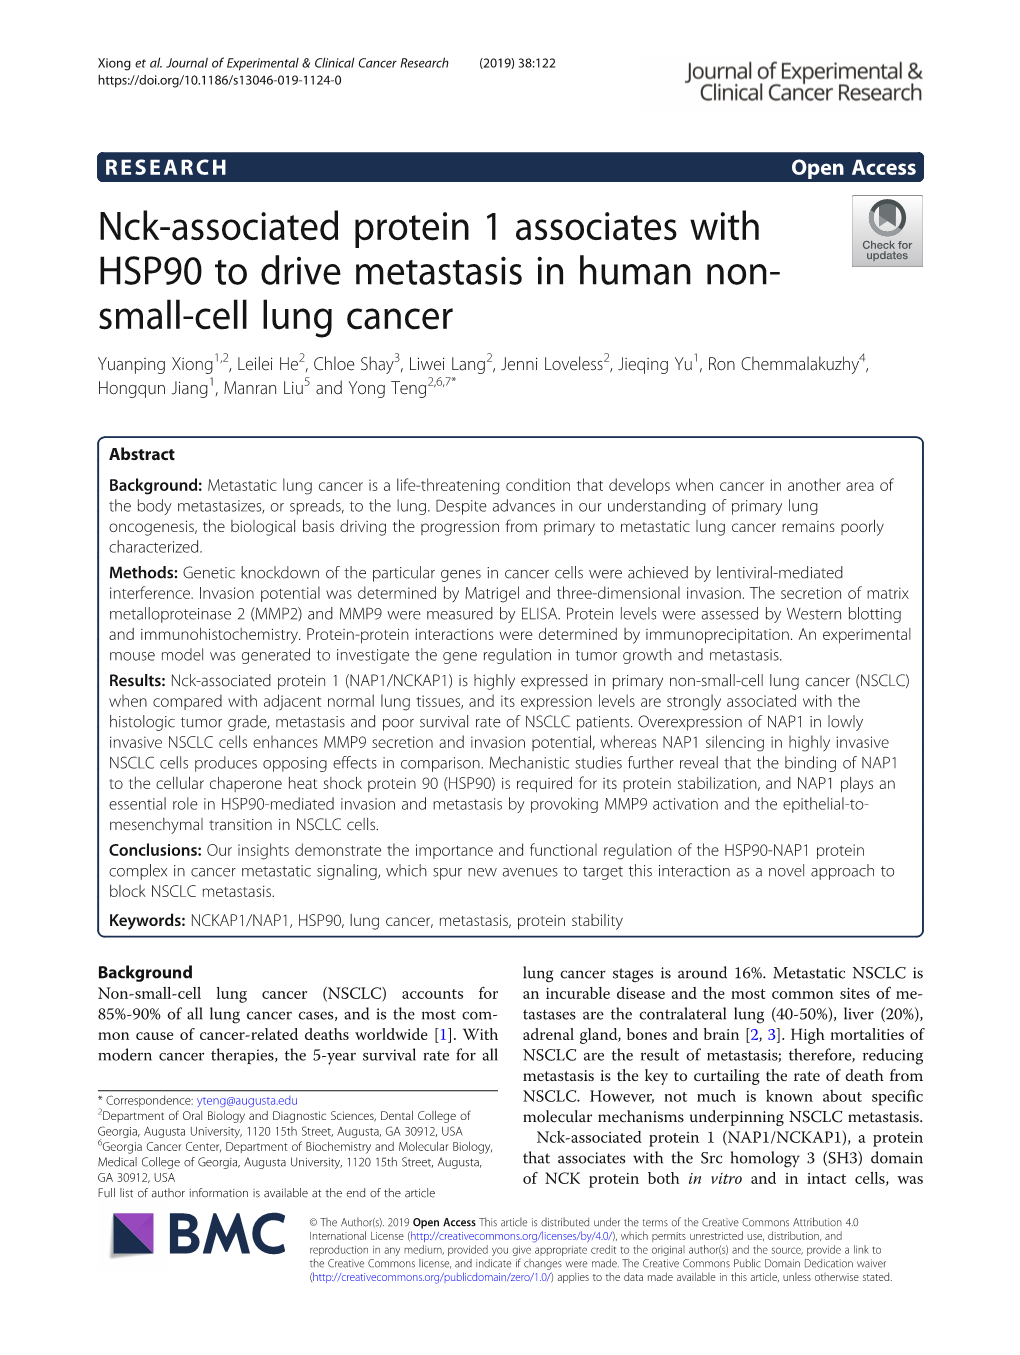 Nck-Associated Protein 1 Associates with HSP90 to Drive Metastasis In